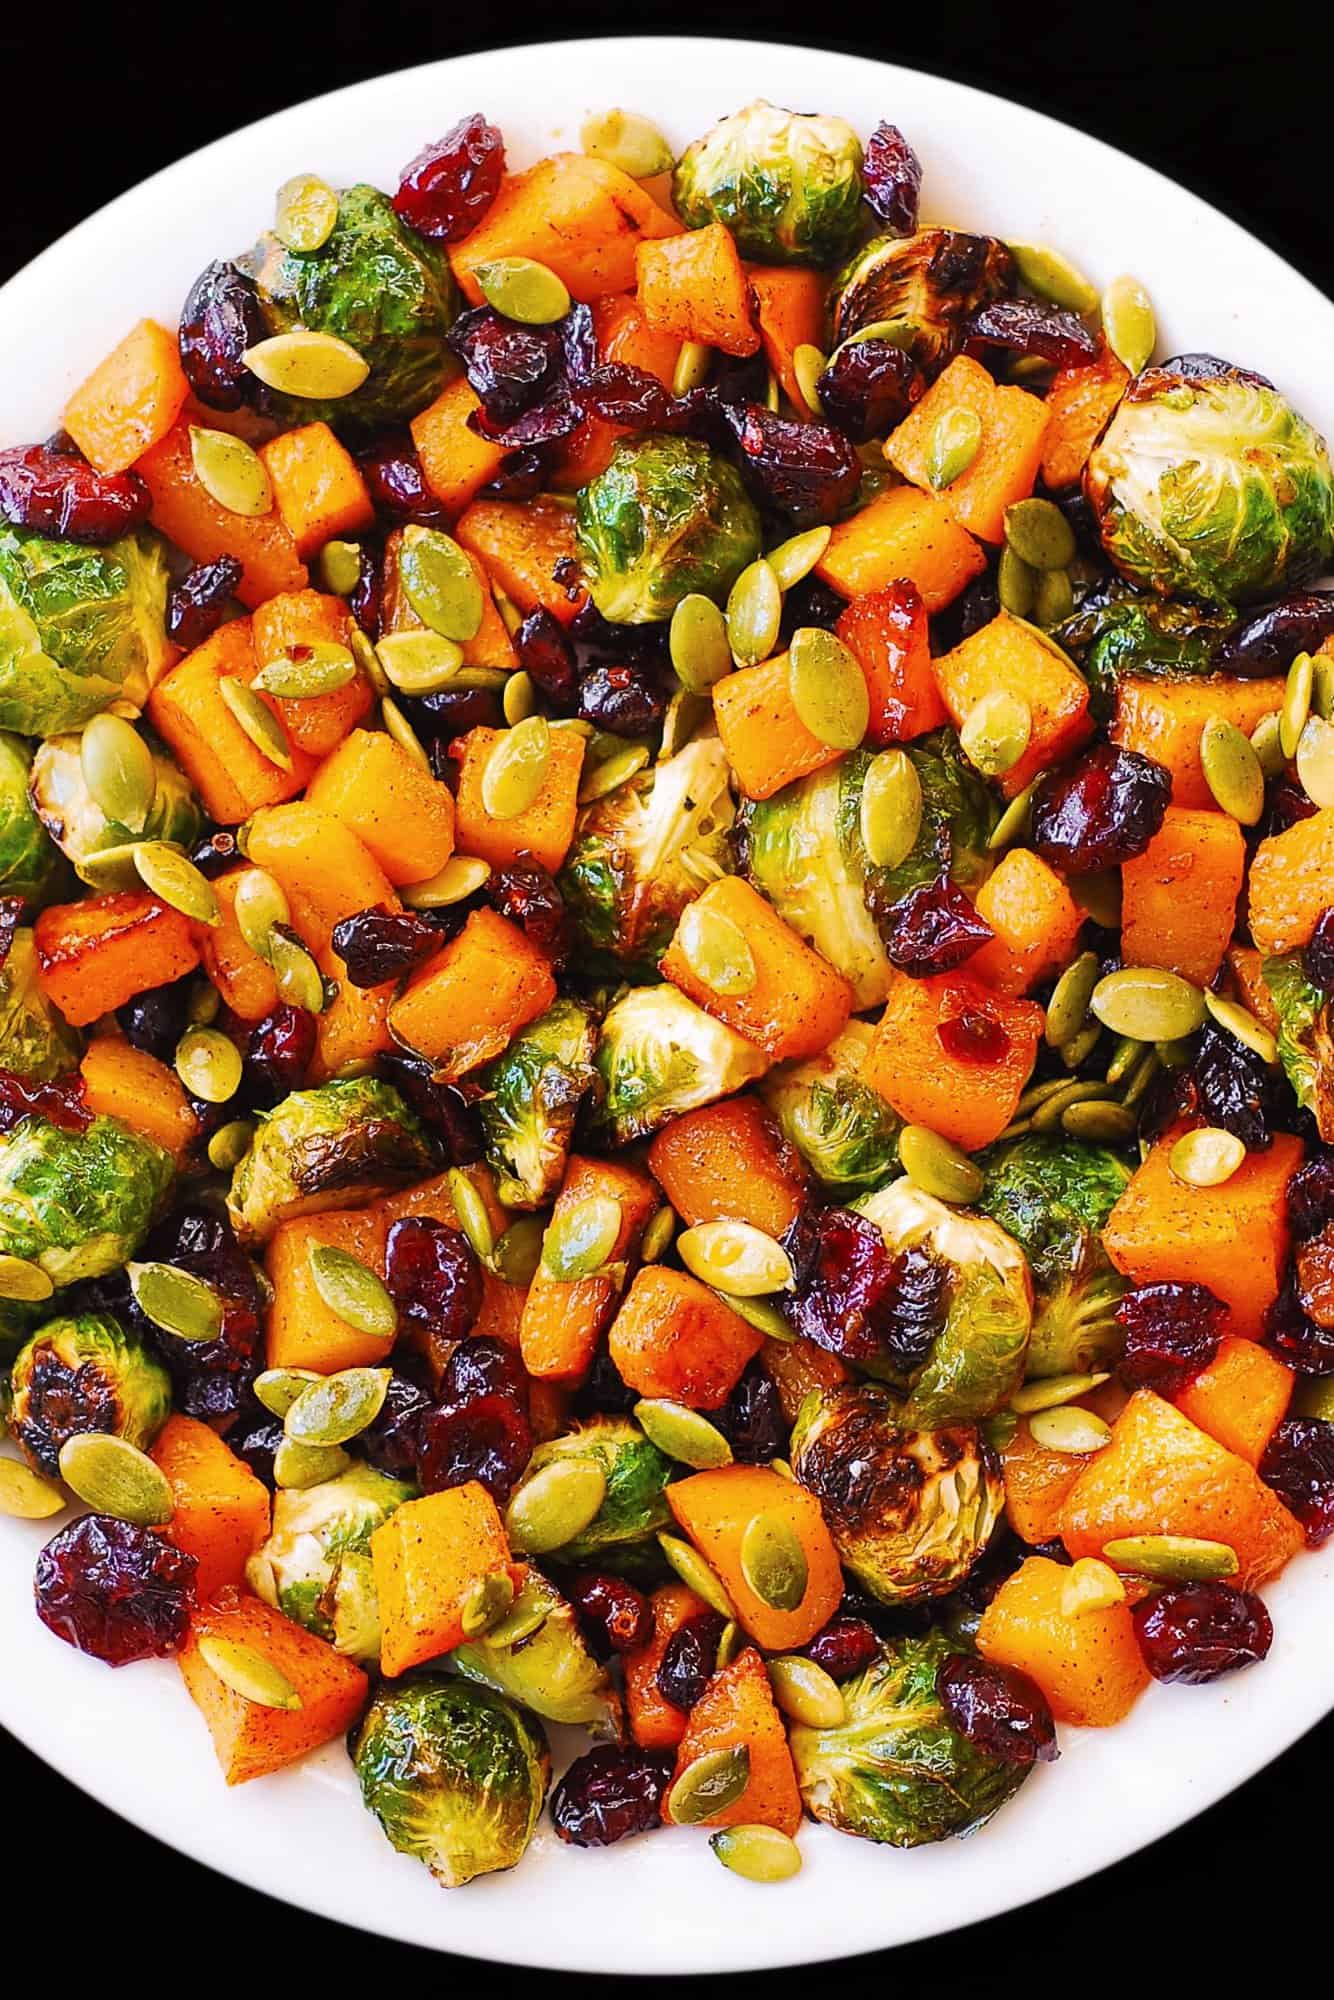 Roasted Brussels Sprouts Salad with Maple Butternut Squash, Pumpkin Seeds, and Cranberries - on a white plate.